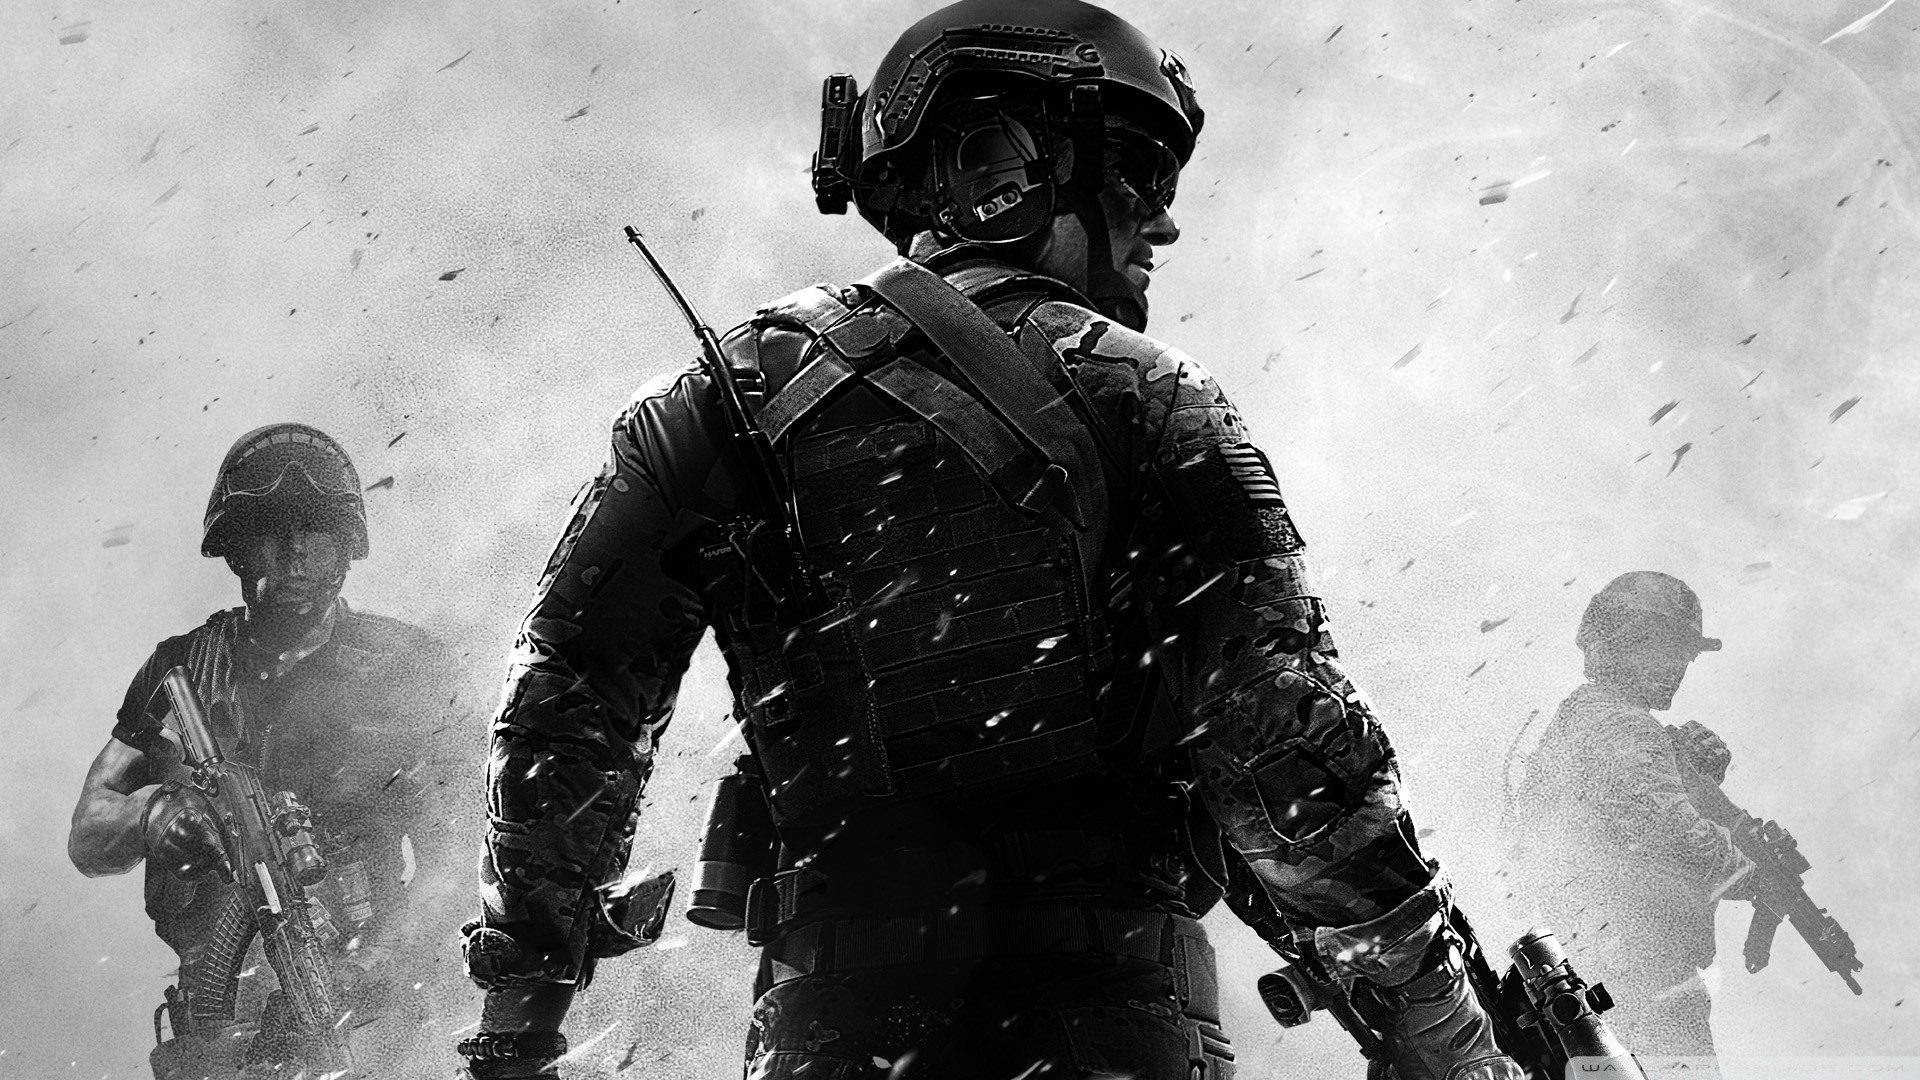 General 1920x1080 Call of Duty monochrome weapon soldier video games PC gaming video game men video game art machine gun